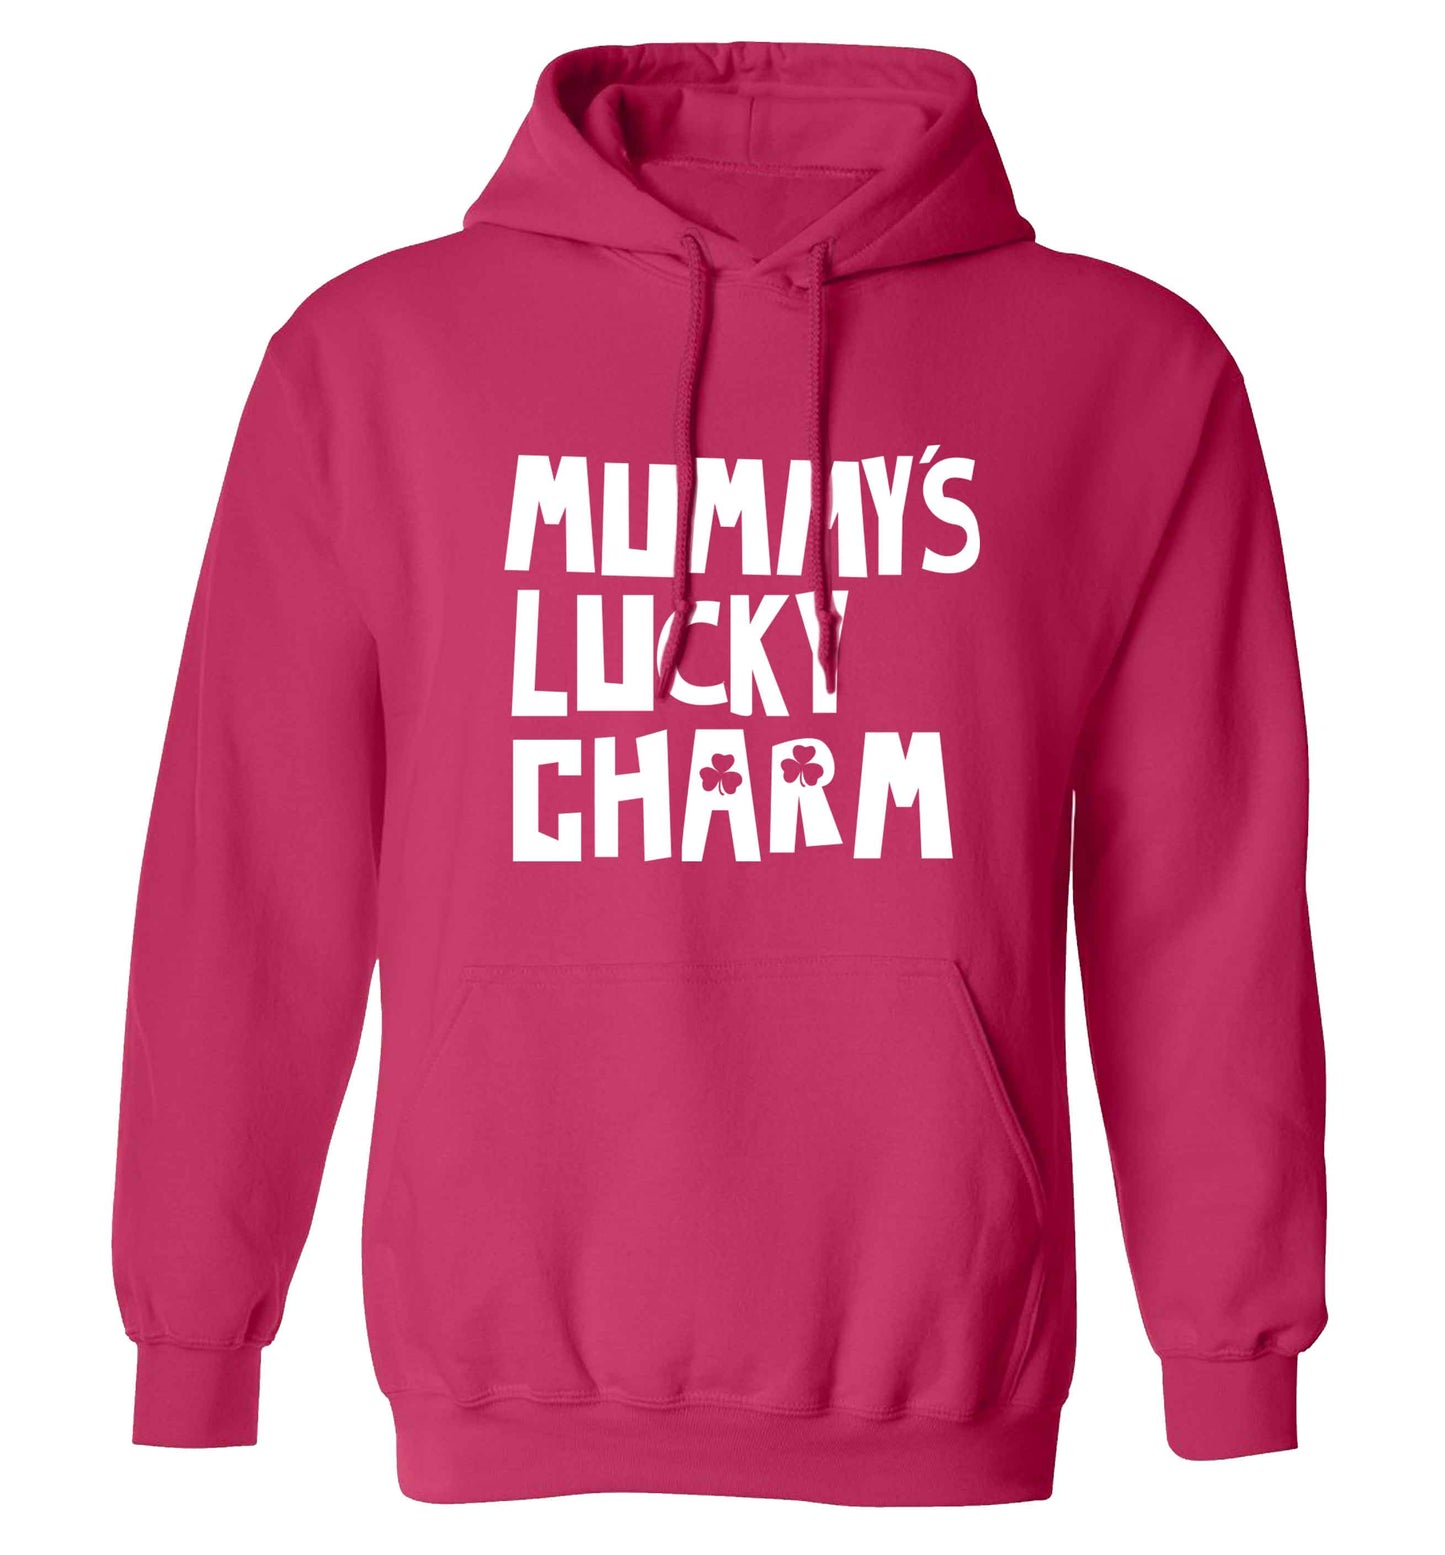 Mummy's lucky charm adults unisex pink hoodie 2XL